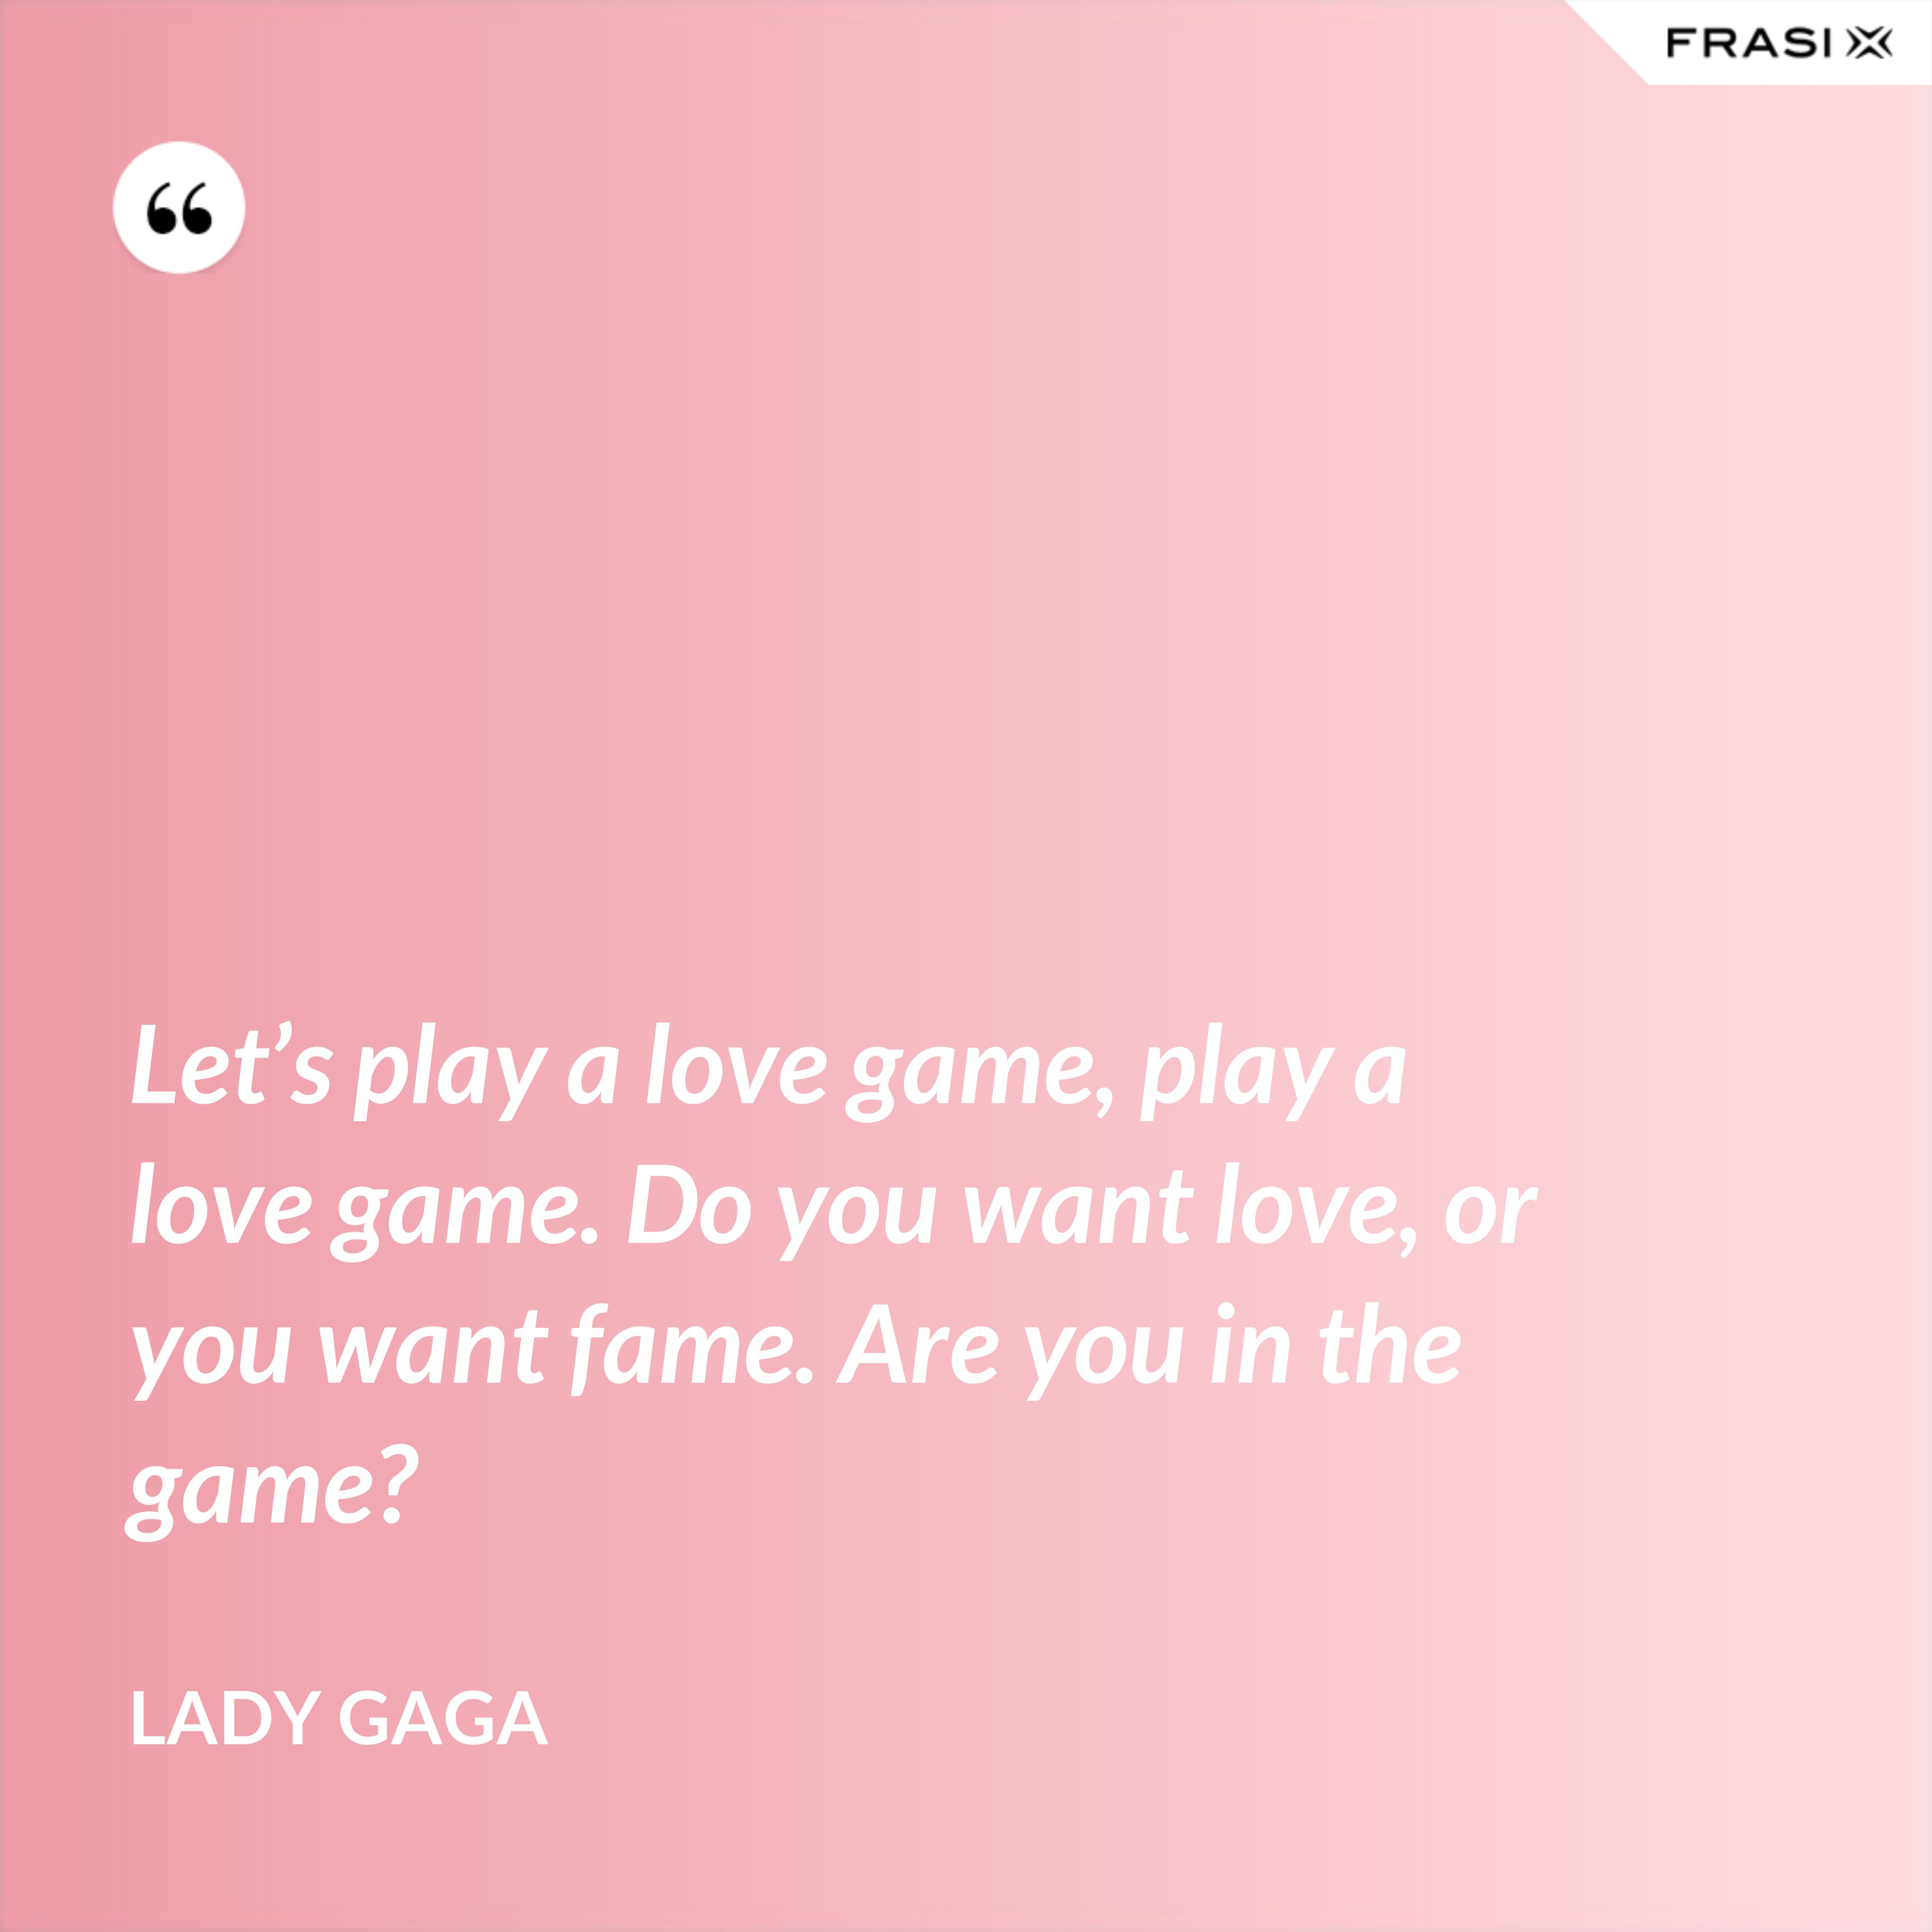 Let’s play a love game, play a love game. Do you want love, or you want fame. Are you in the game? - Lady Gaga